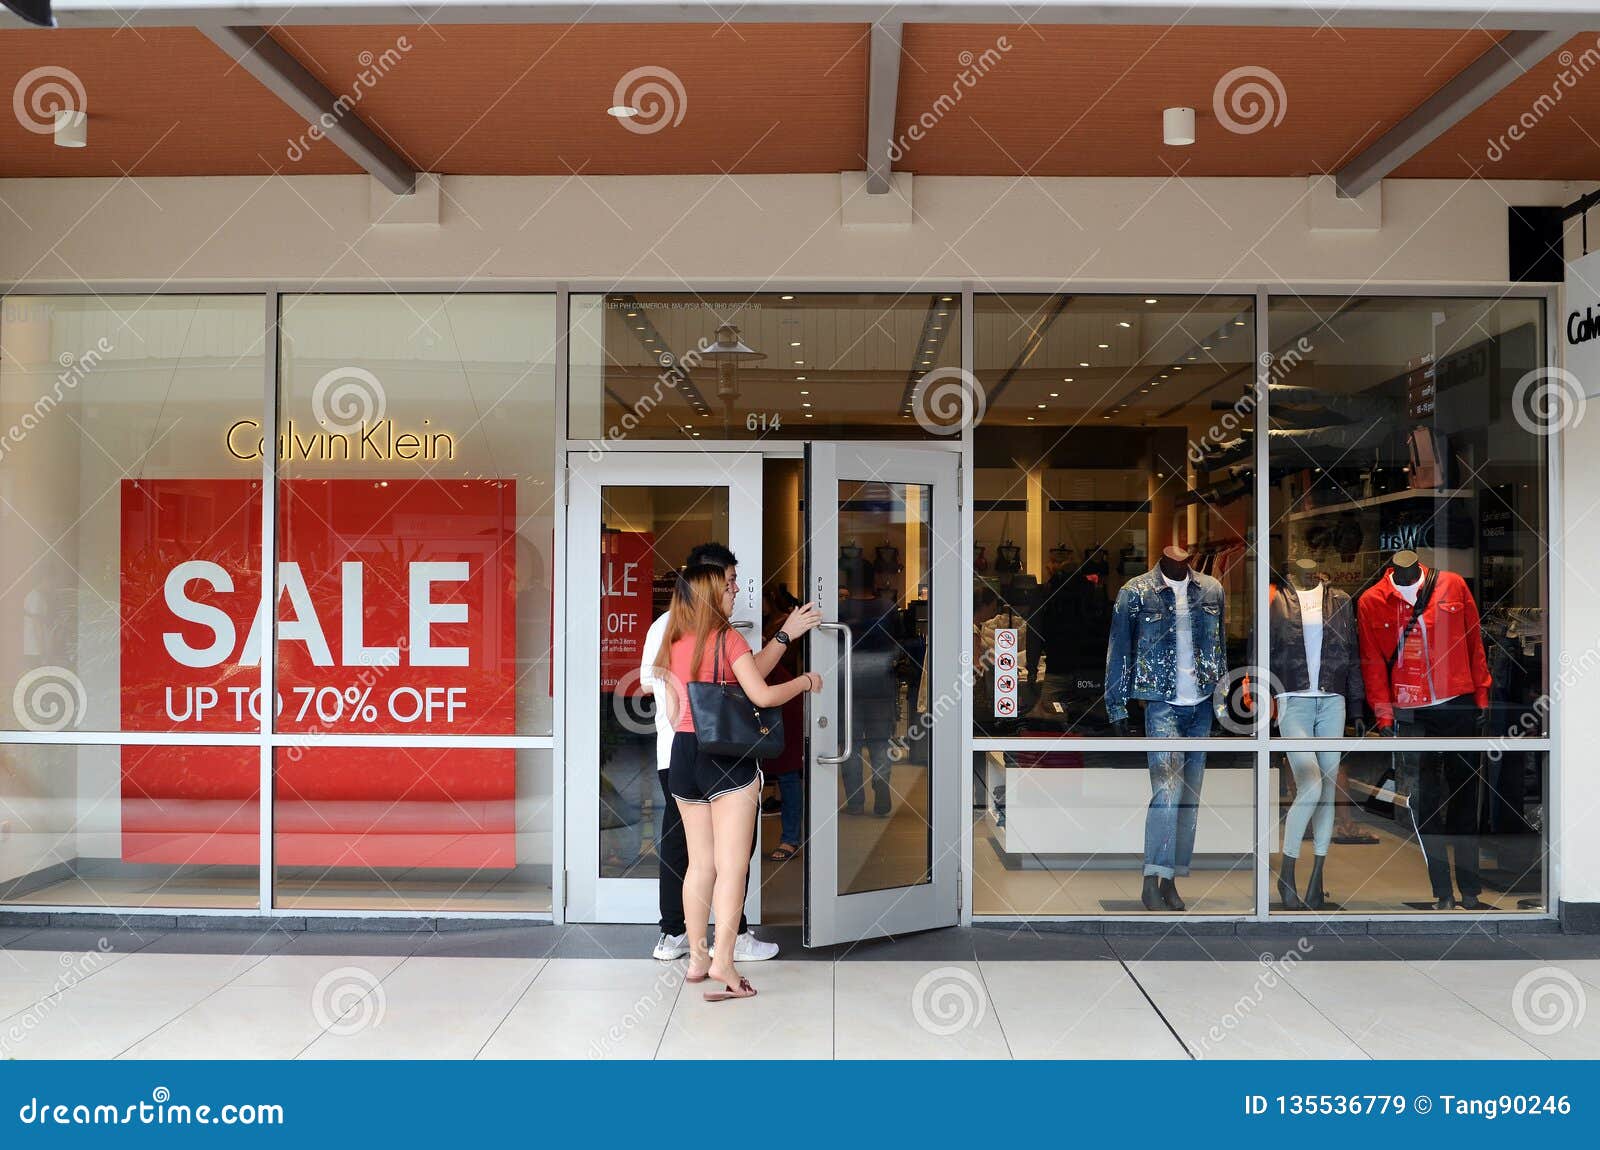 Calvin Klein Outlet at Genting Highlands Premium Outlets, Malaysia Editorial Stock Image - Image boutique, business: 135536779